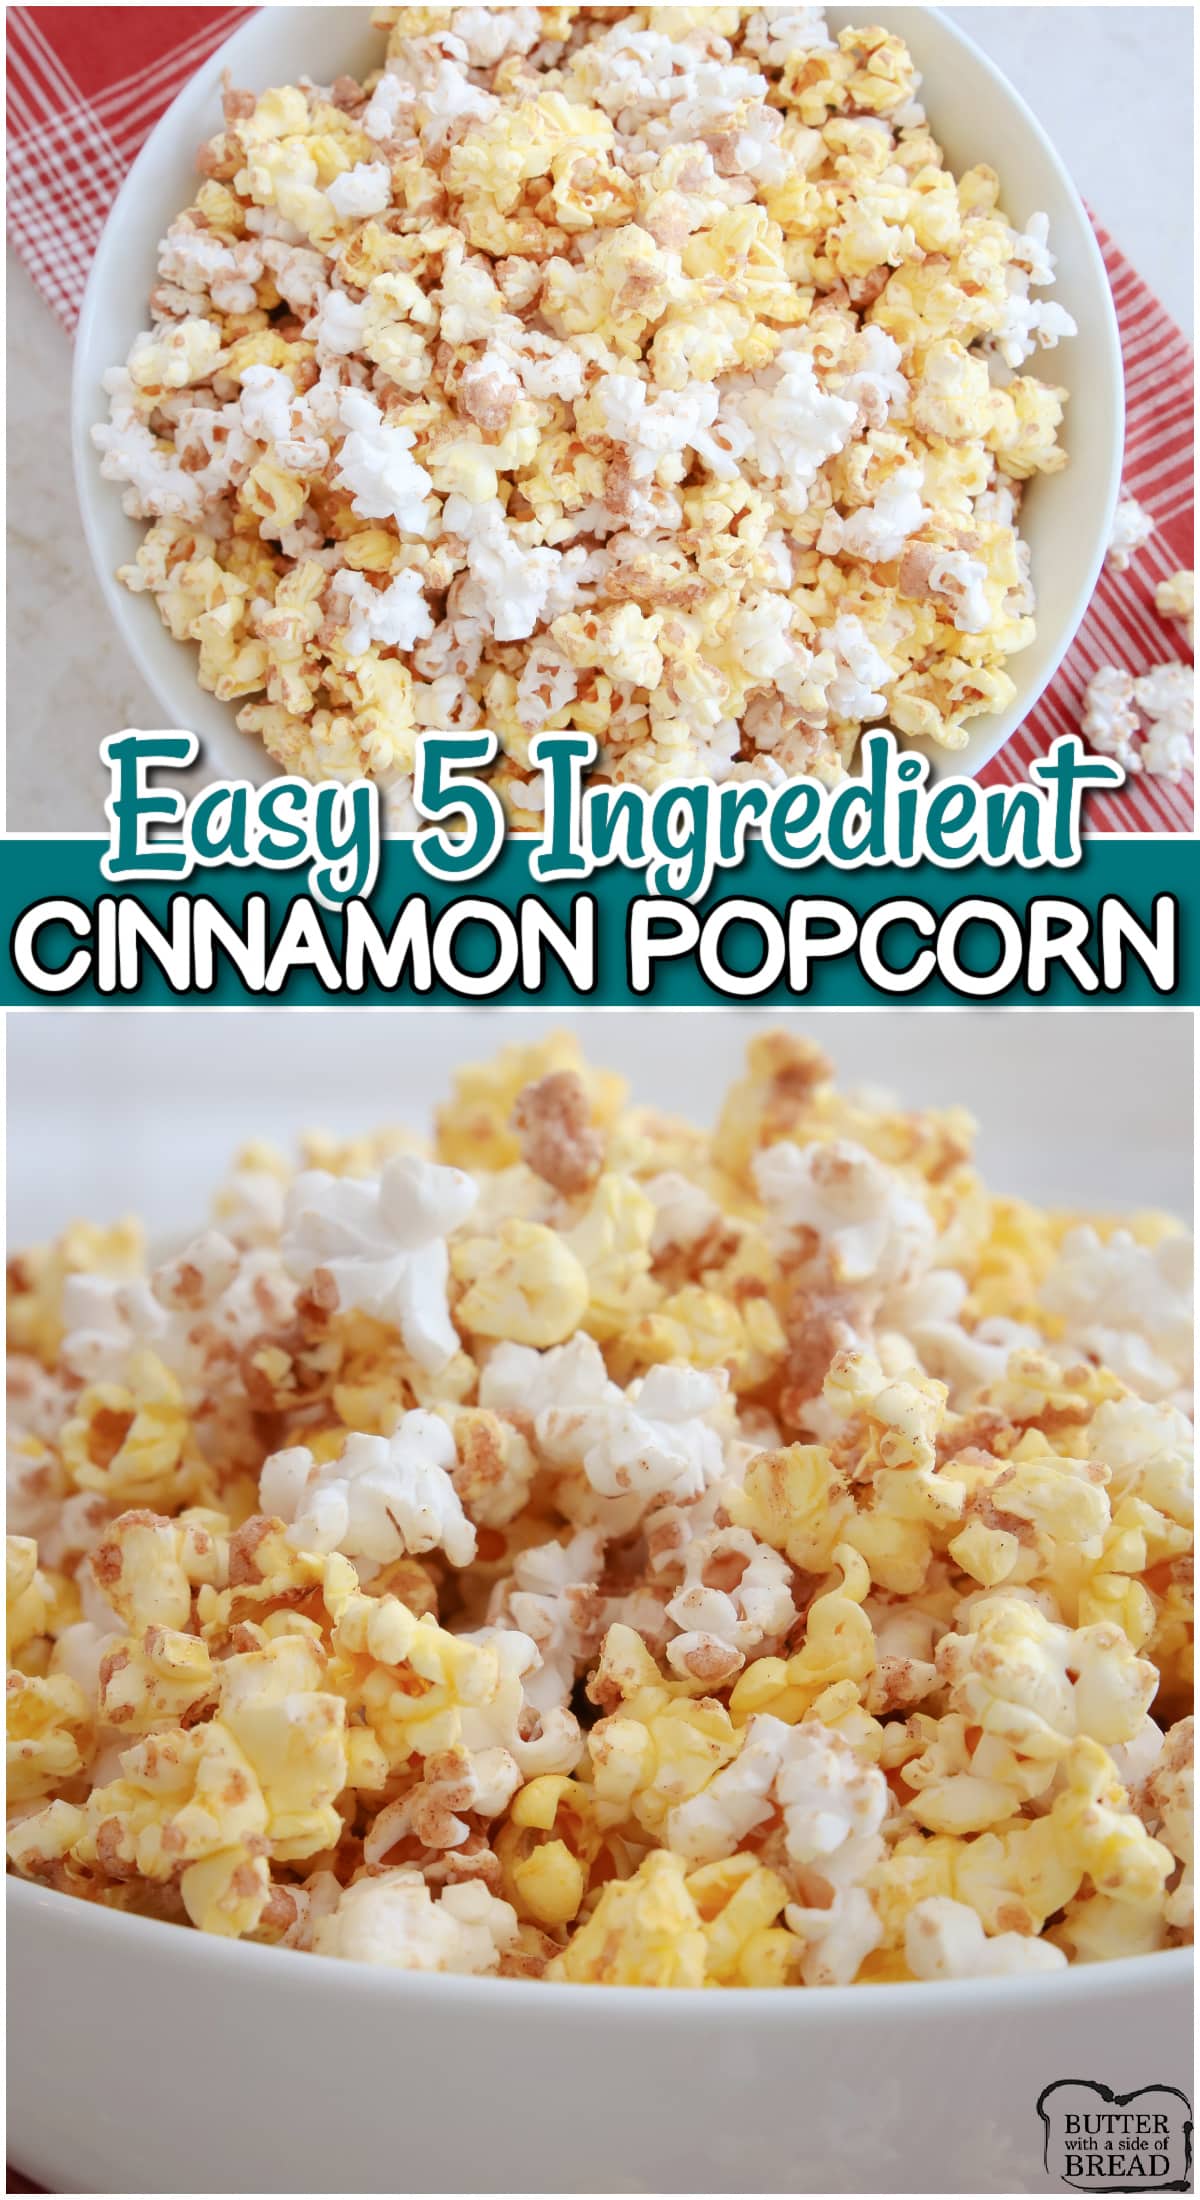 Easy homemade Cinnamon Popcorn is made with just 5 ingredients & tastes like the best kettle corn you've ever had! It's a sweet and salty popcorn with fantastic cinnamon flavor that's a perfect dessert!